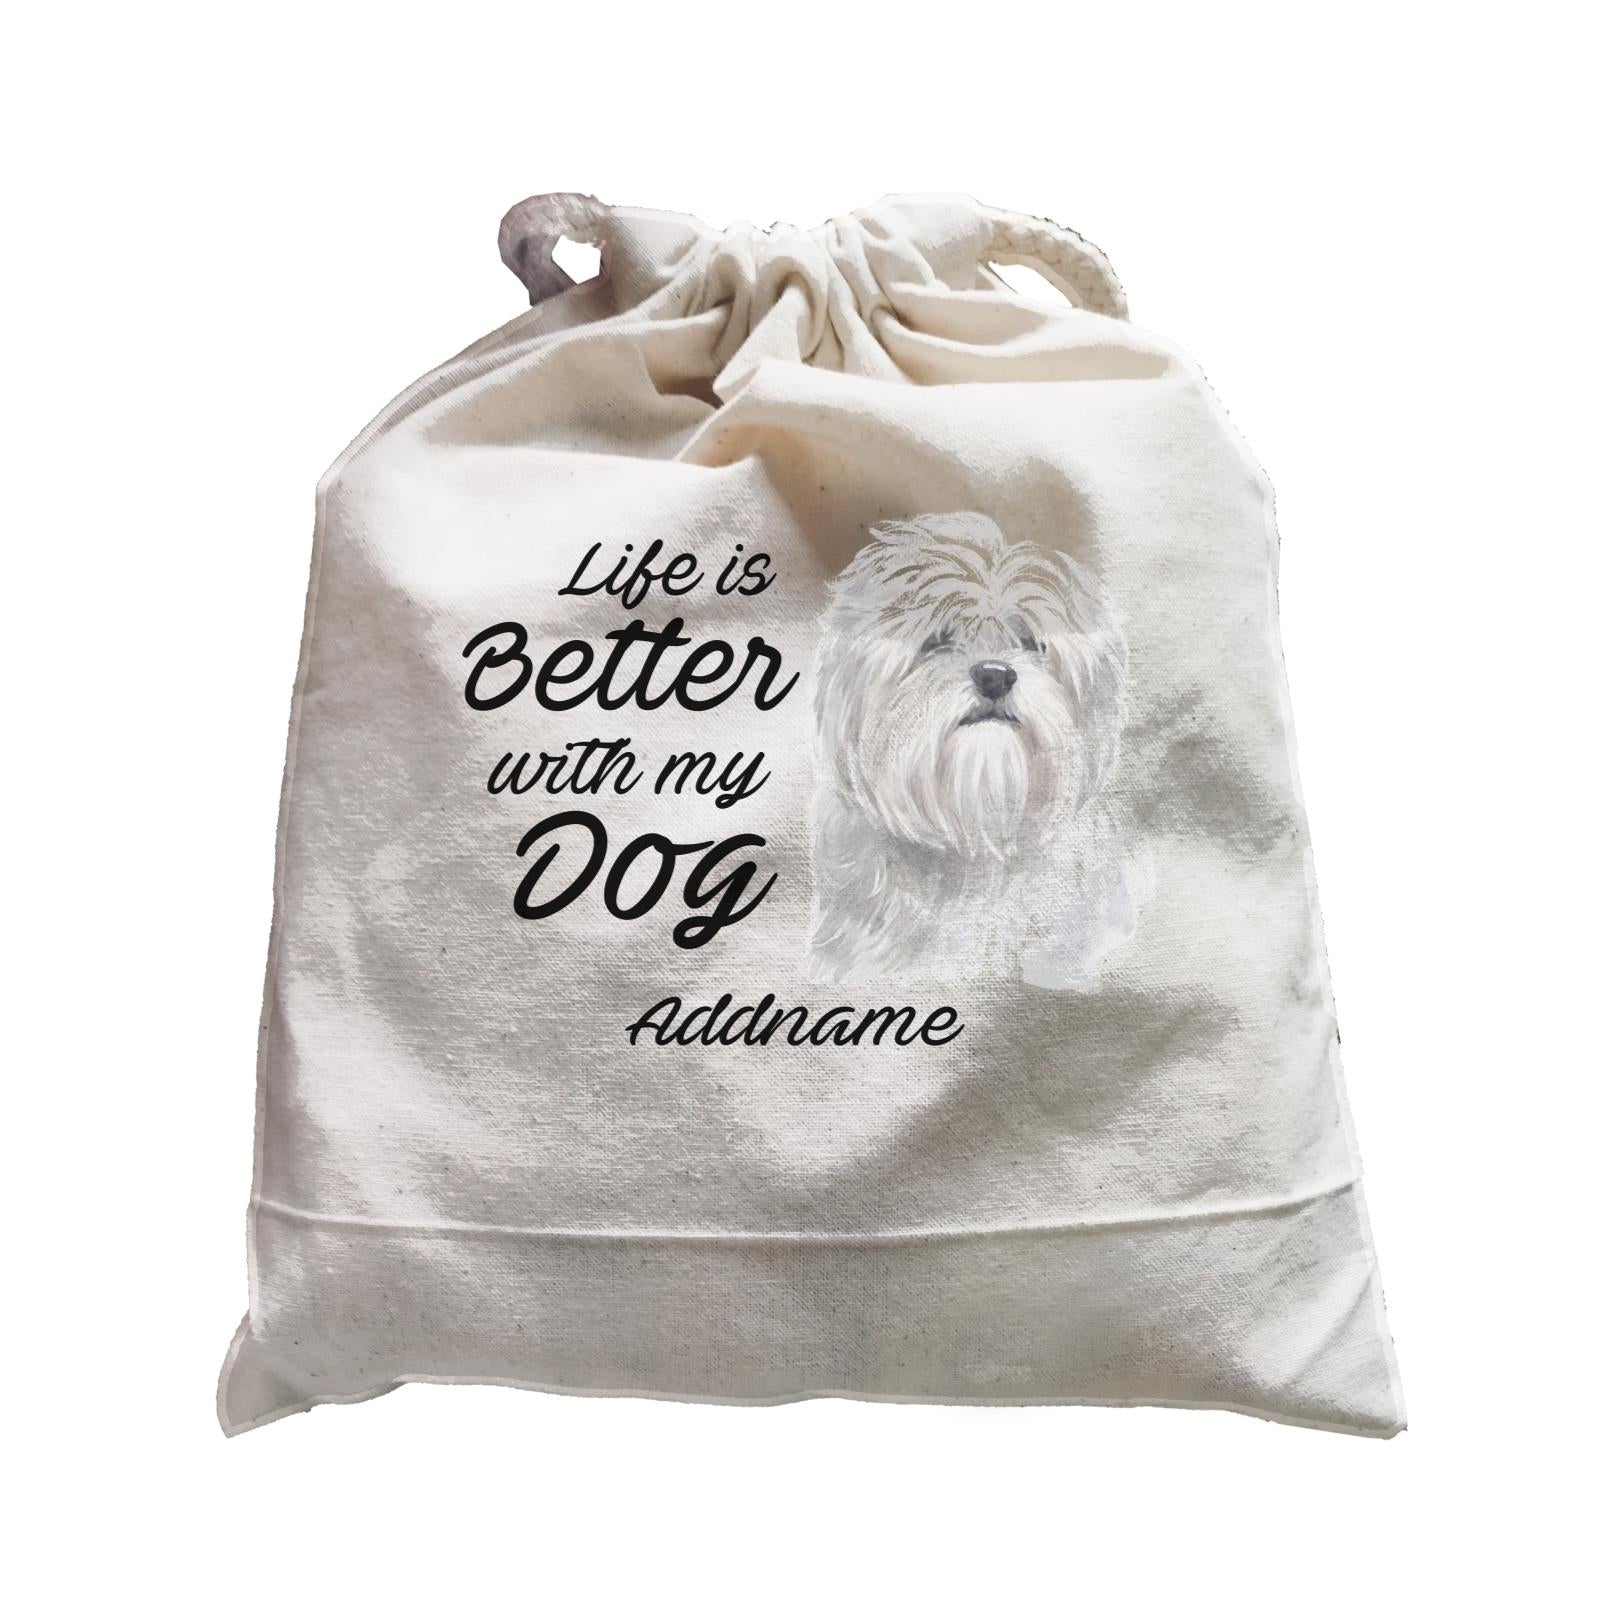 Watercolor Life is Better With My Dog Lhasa Apso Addname Satchel